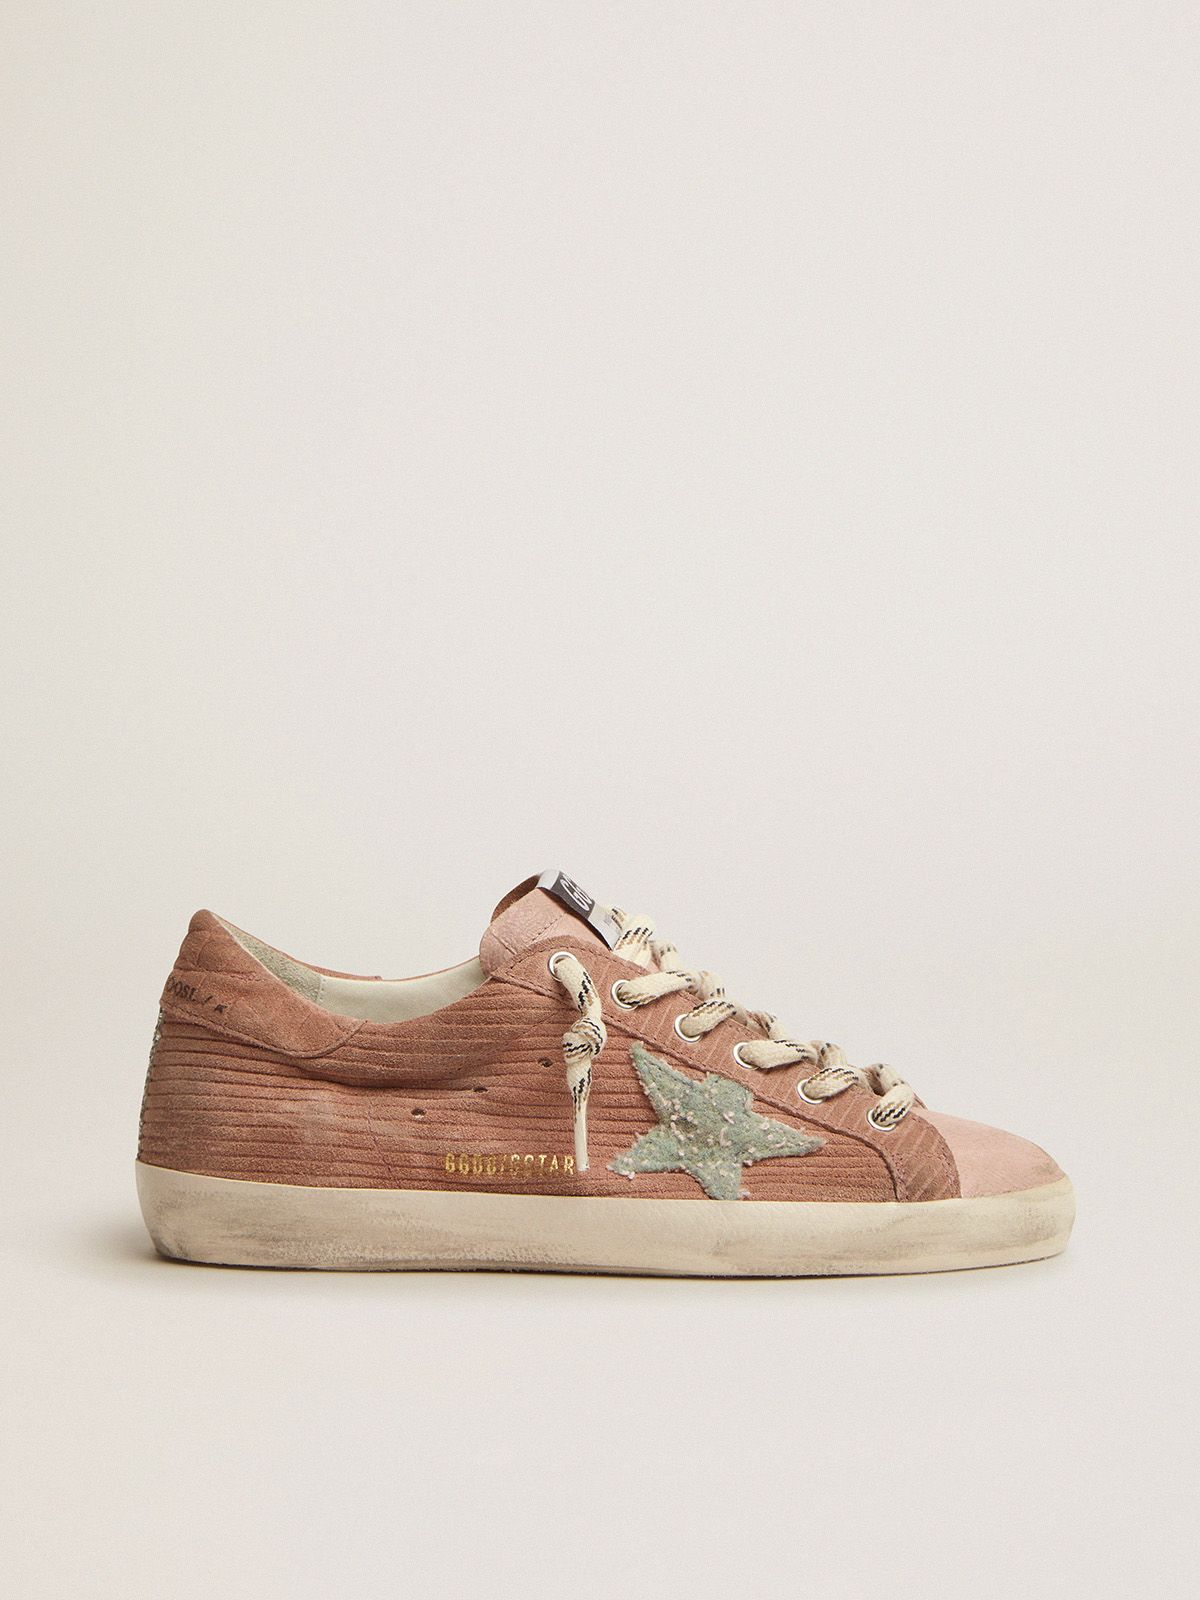 Sneakers Uomo Golden Goose Super-Star sneakers in peach-pink suede with corduroy print and bouclé star